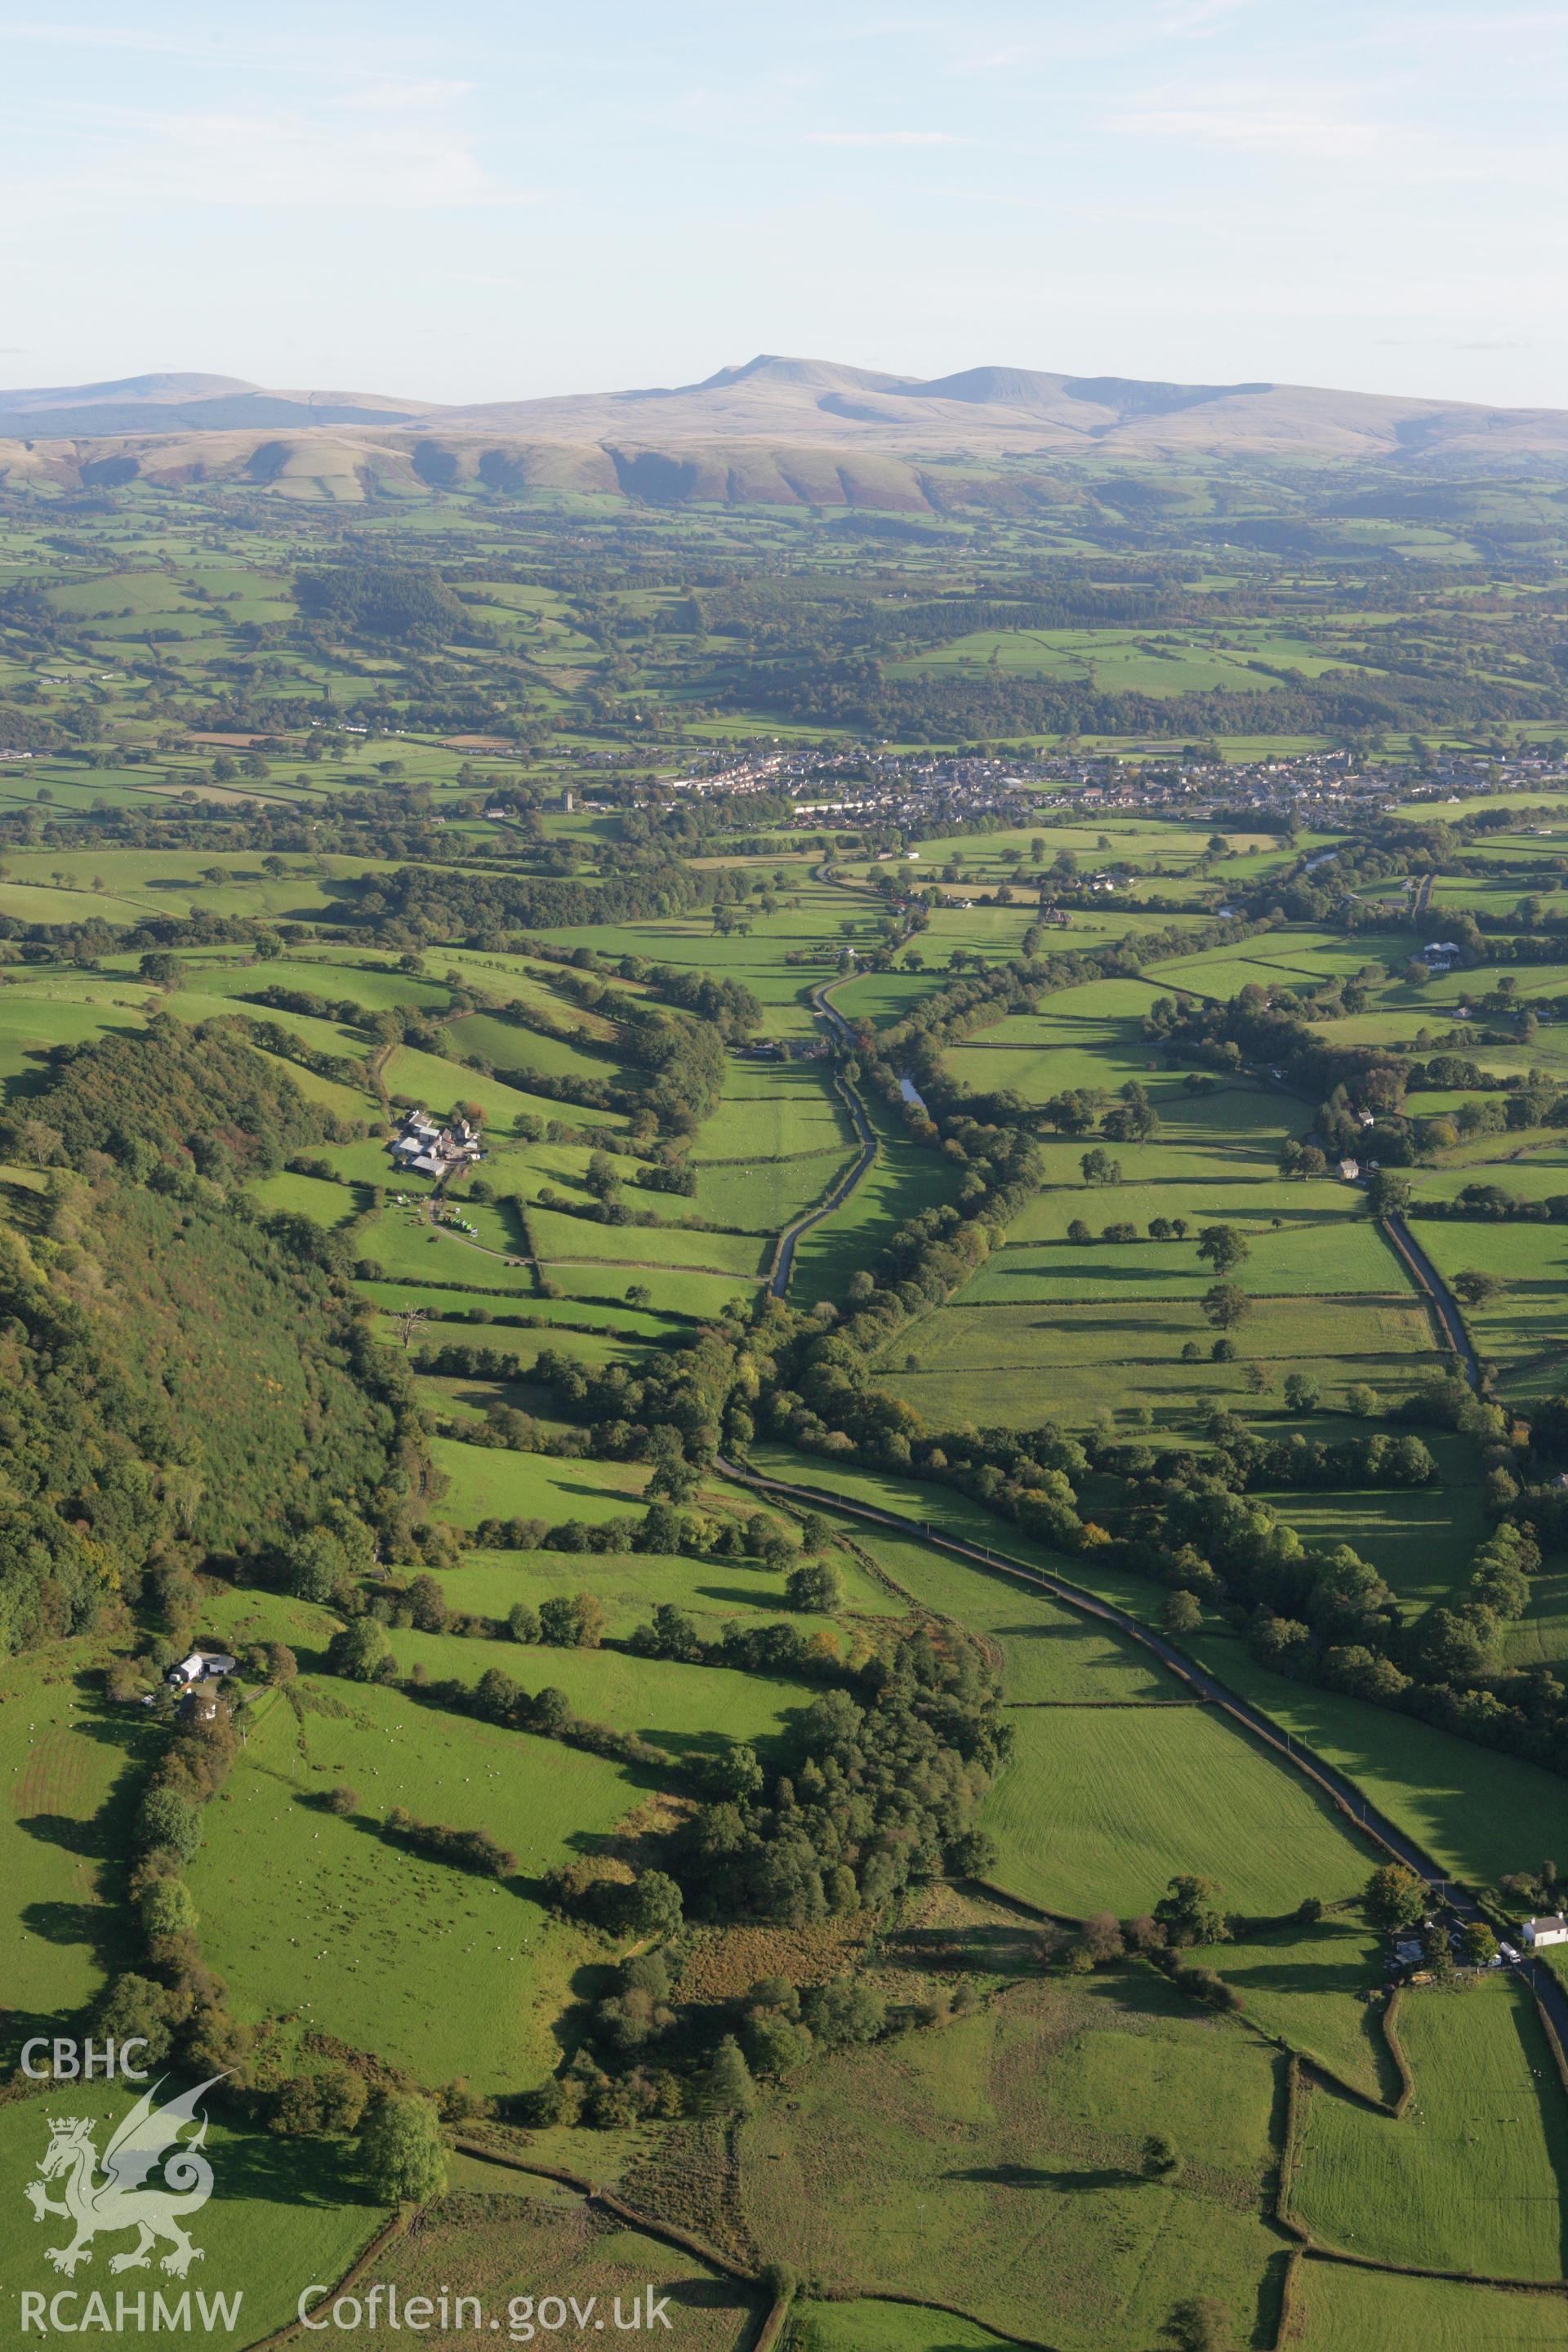 RCAHMW colour oblique photograph of Llandovery, landscape view from the north. Taken by Toby Driver on 04/10/2007.